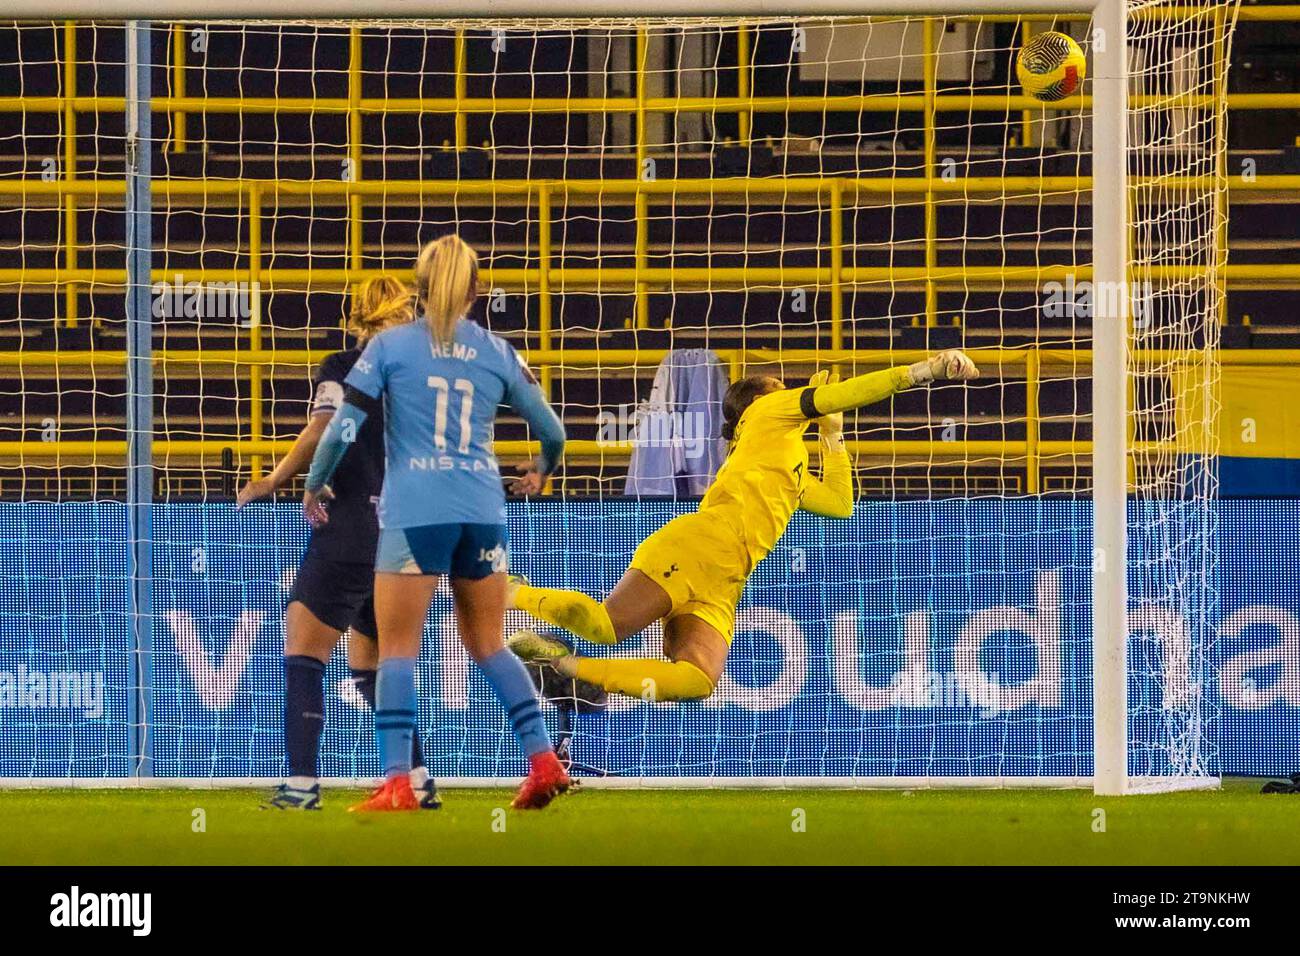 Manchester on Saturday 25th November 2023.Lauren Hemp #11 of Manchester City scores a goal during the Barclays FA Women's Super League match between Manchester City and Tottenham Hotspur at the Joie Stadium, Manchester on Saturday 25th November 2023. (Photo: Mike Morese | MI News) Credit: MI News & Sport /Alamy Live News Stock Photo